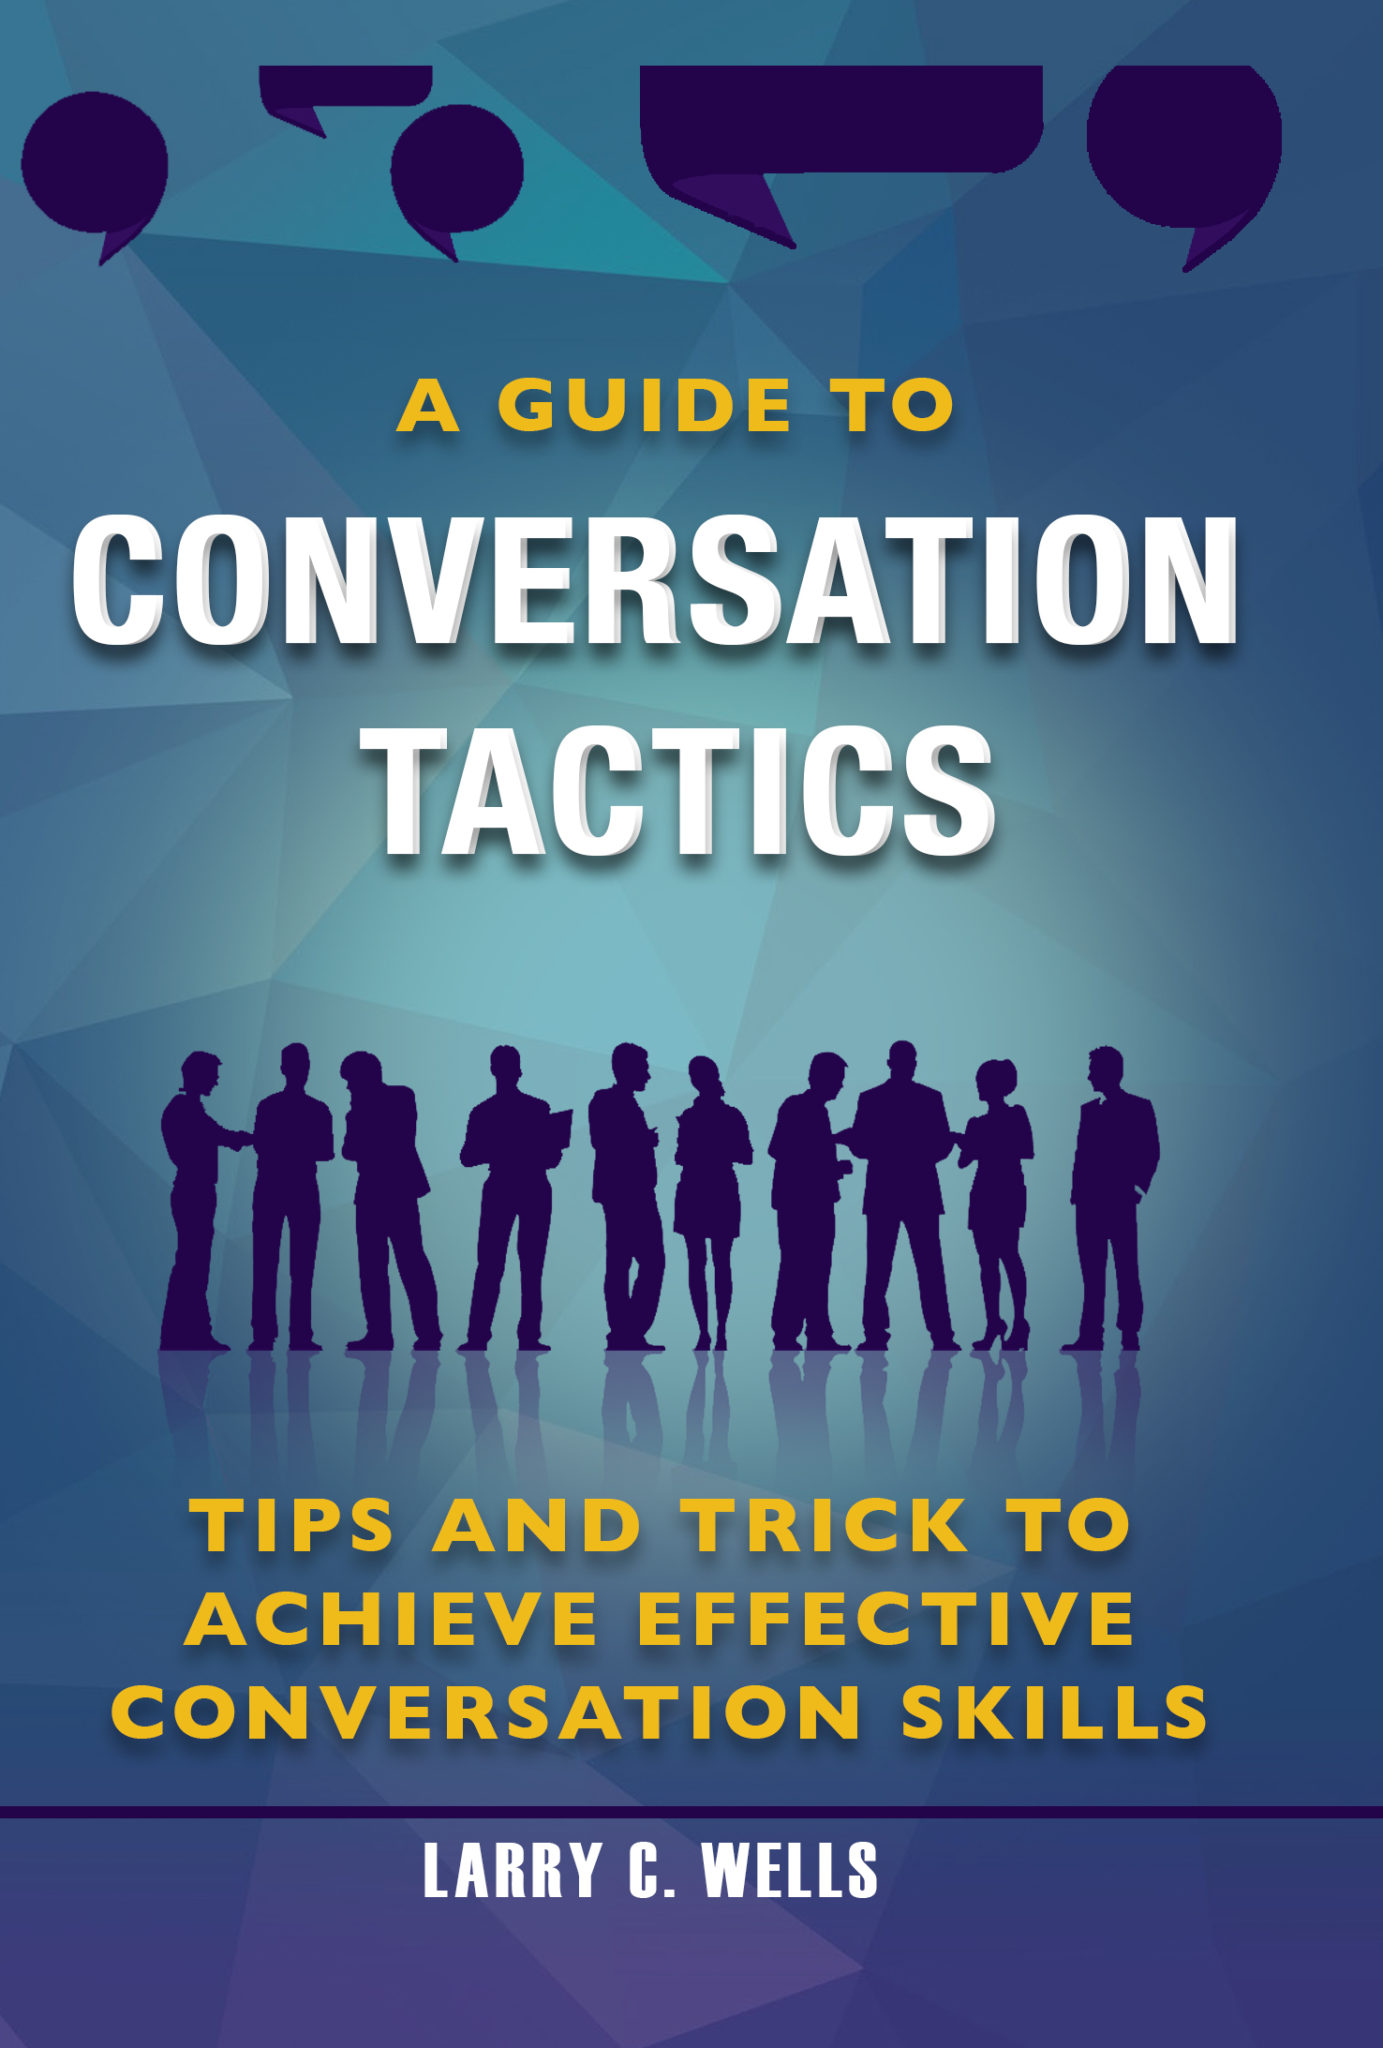 FREE: A Guide To Conversation Tactics tips and trick to achieve effective conversation by Larry C.Wells